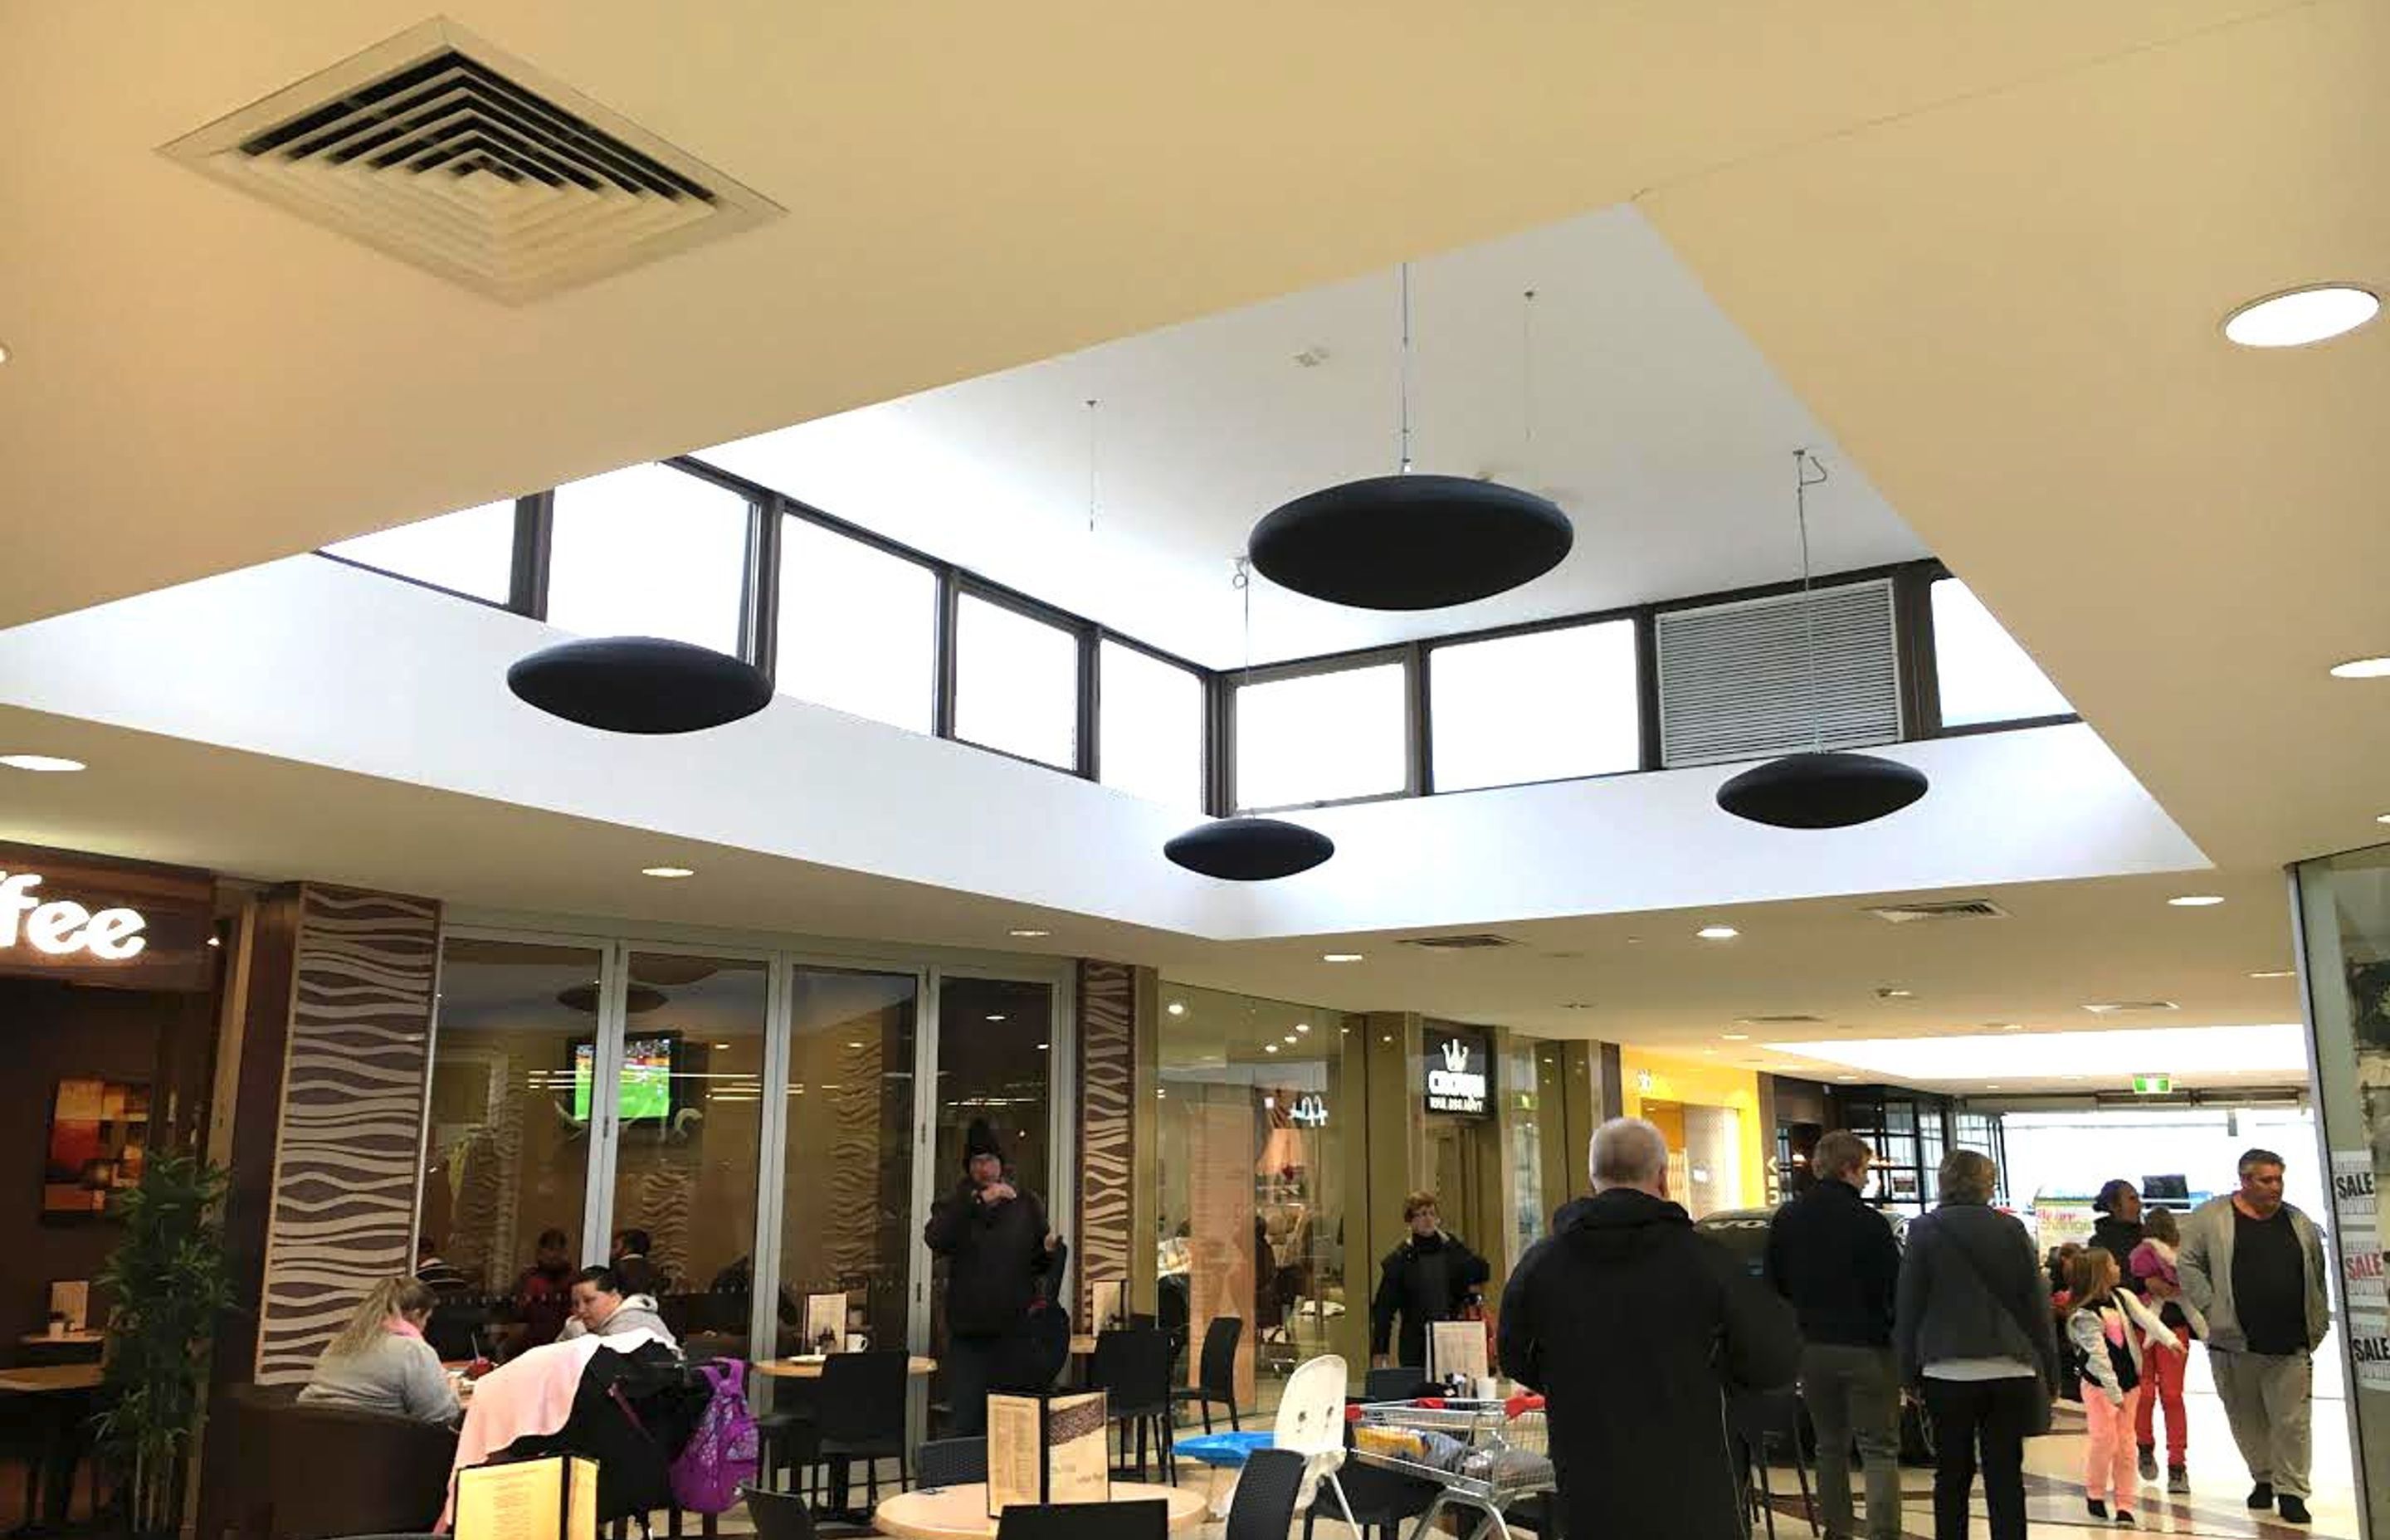 In commercial and industrial applications where the floor area needs to remain clutter free for ease of movement a range of ceiling-mounted options are available.